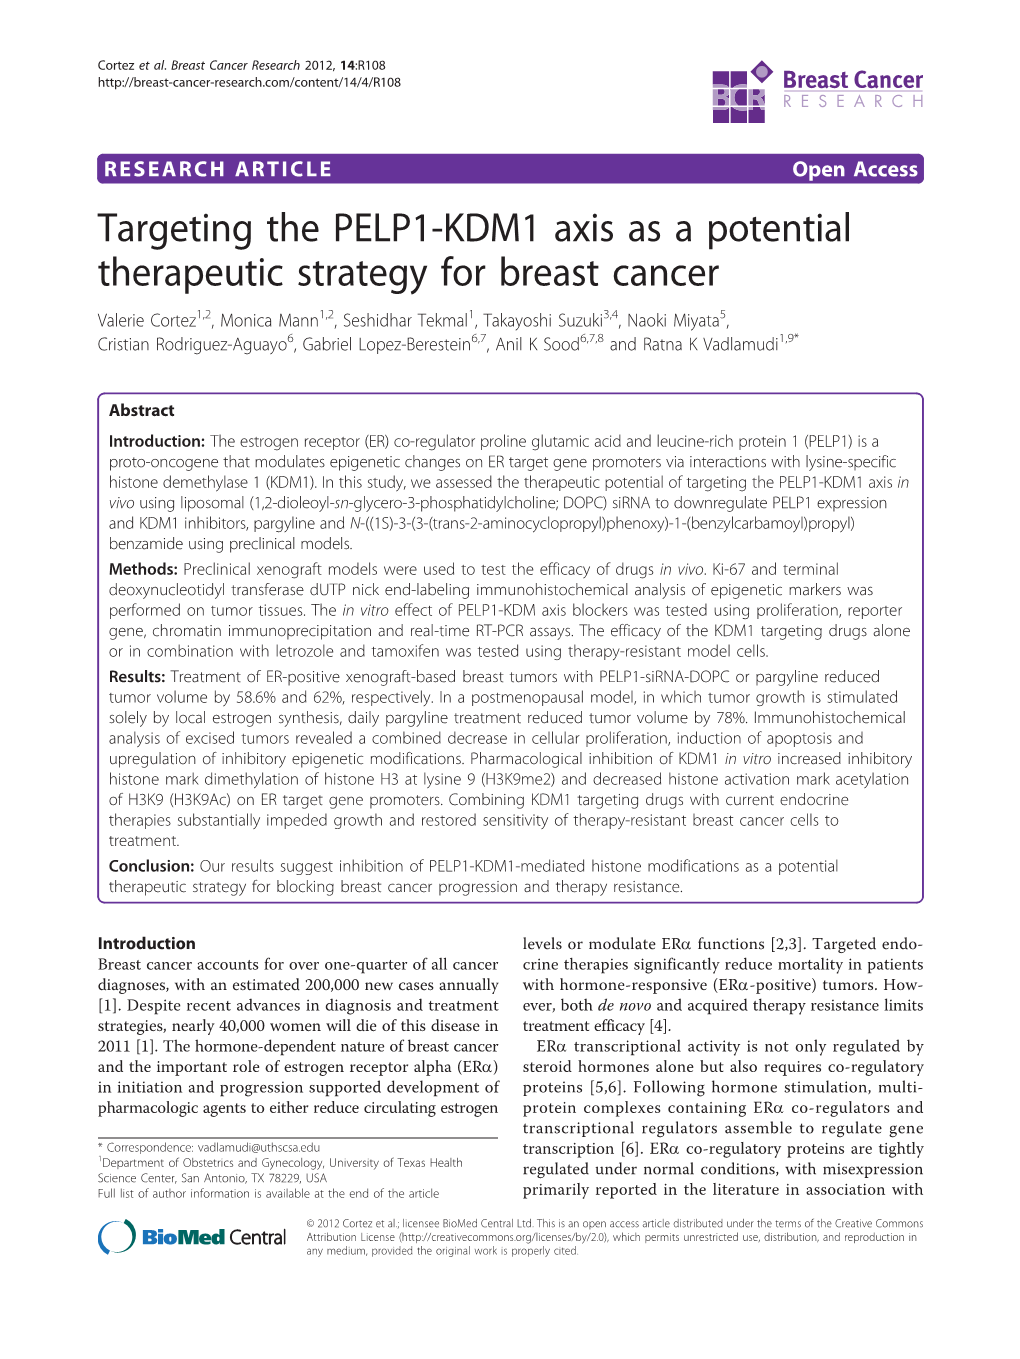 Targeting the PELP1-KDM1 Axis As a Potential Therapeutic Strategy For